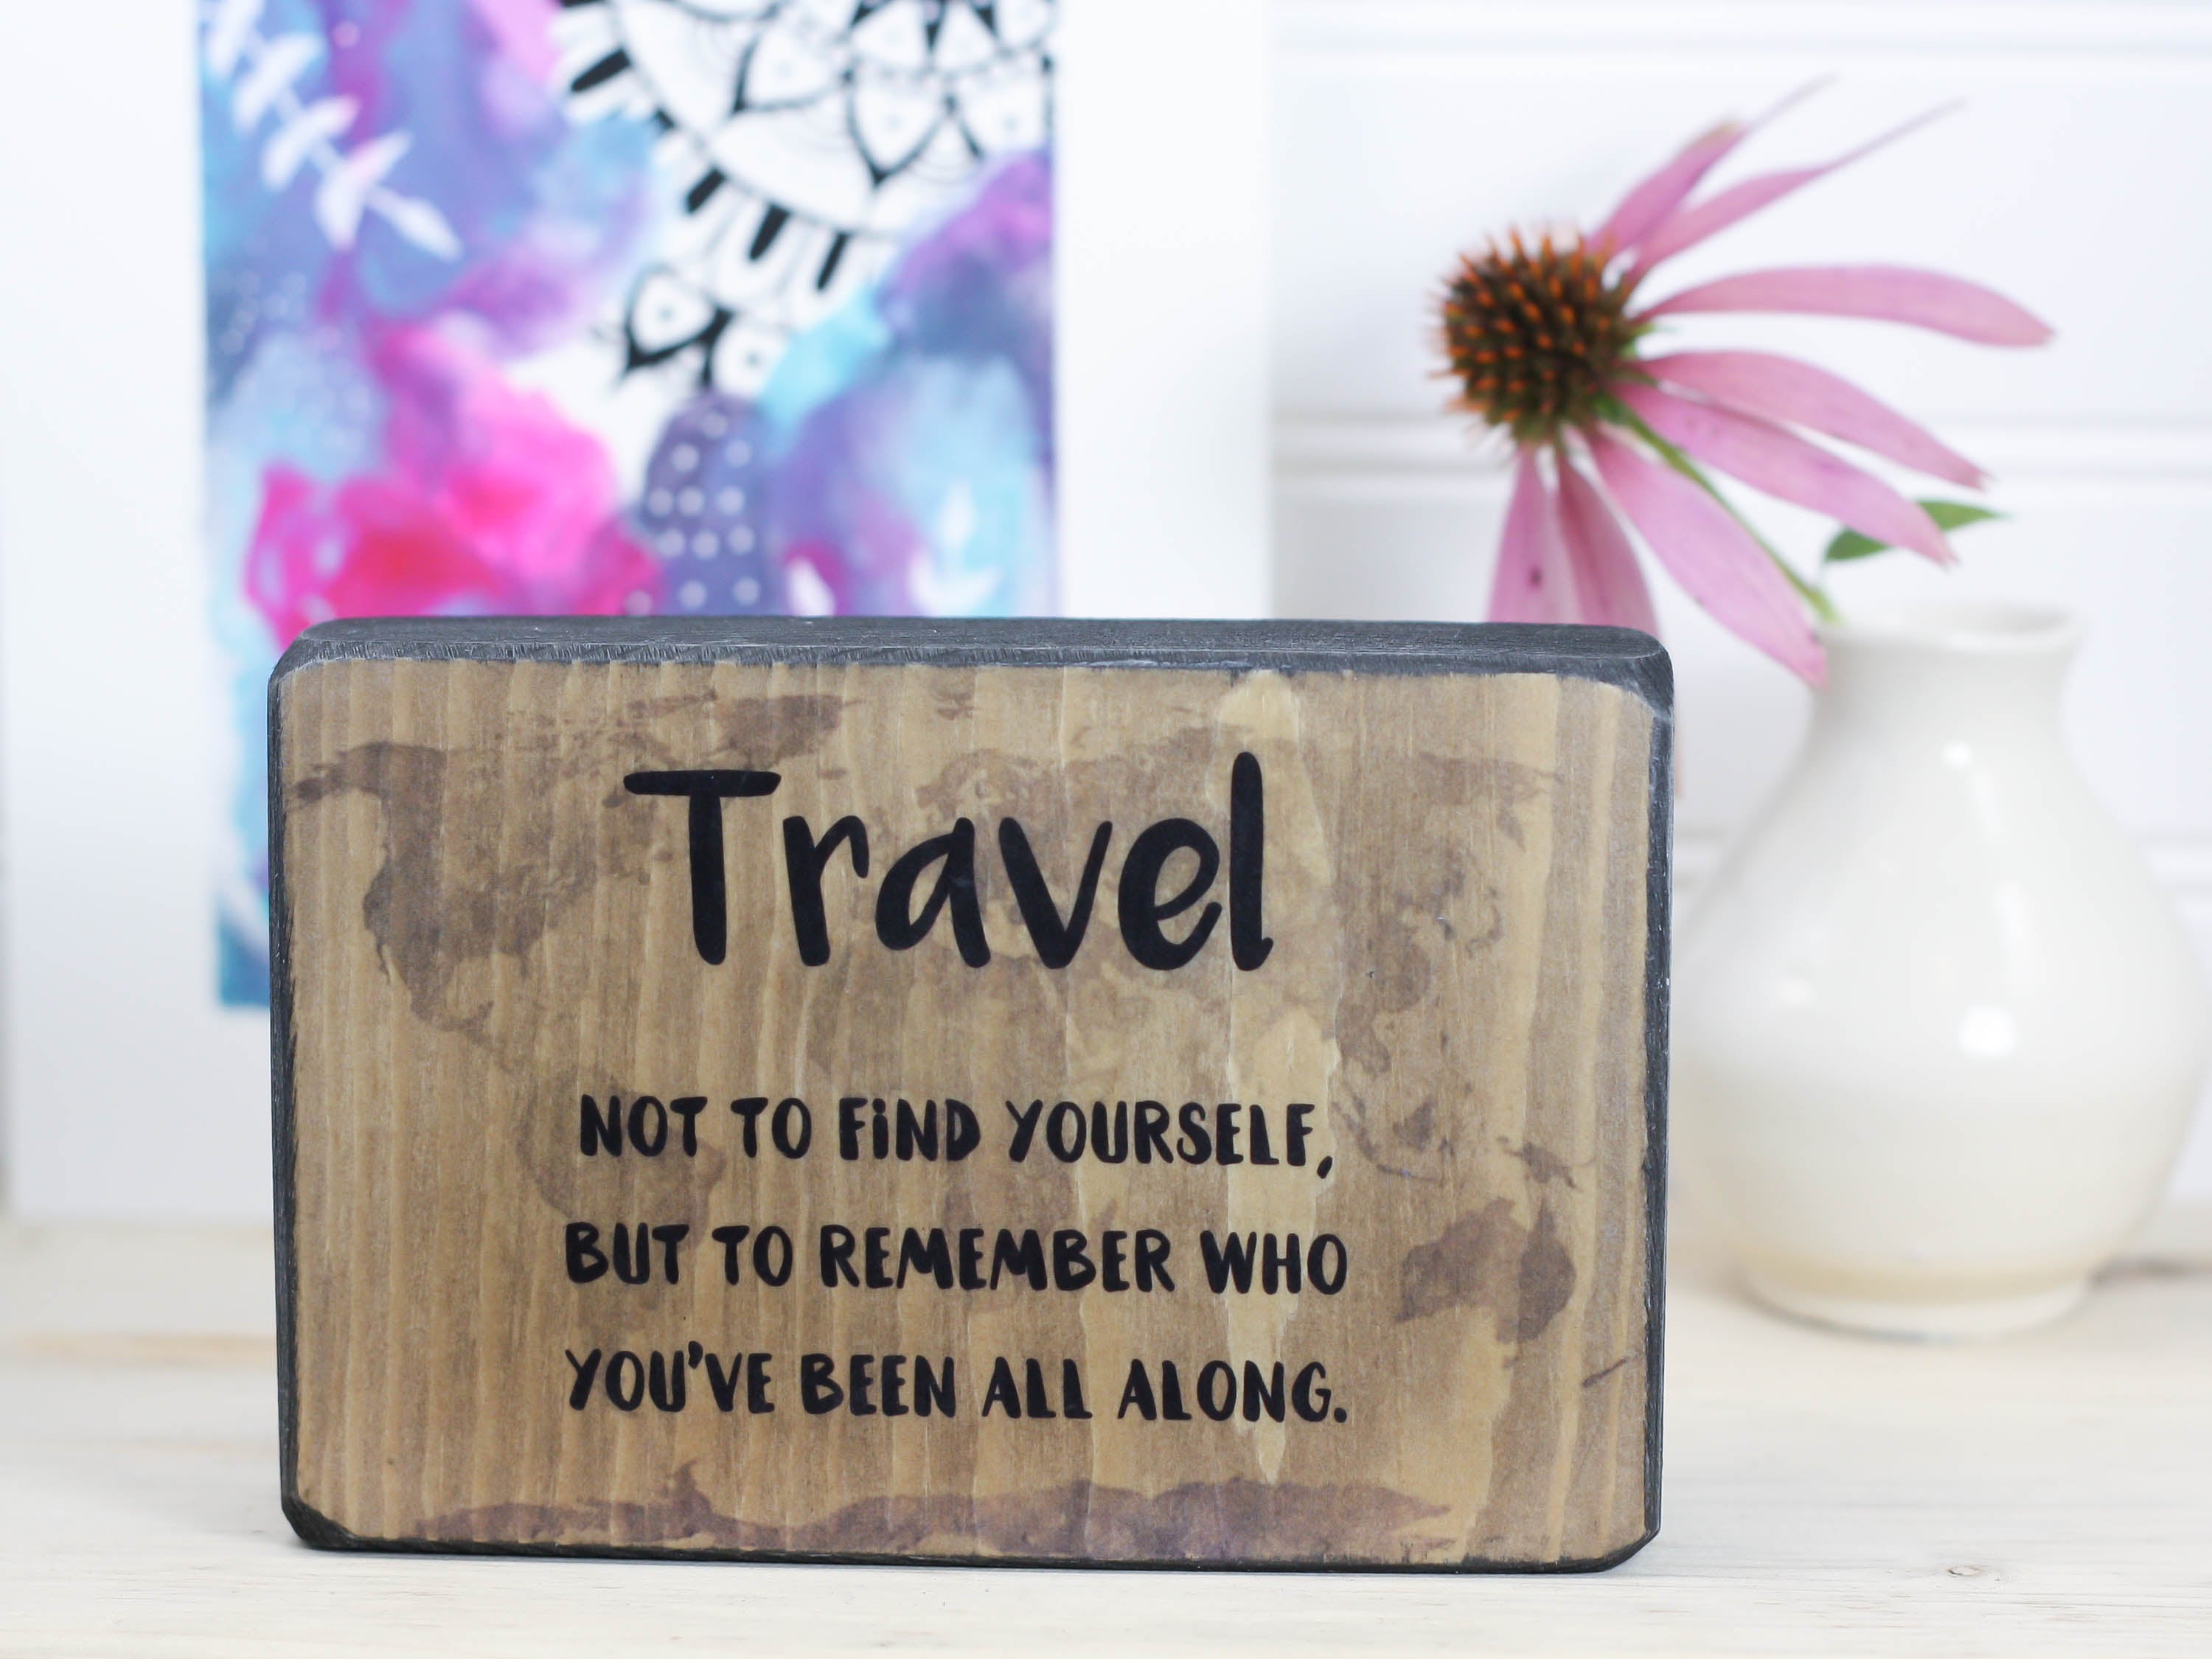 Small wood travel sign in distressed black with the saying "Travel not to find yourself, but to remember who you've been all along."